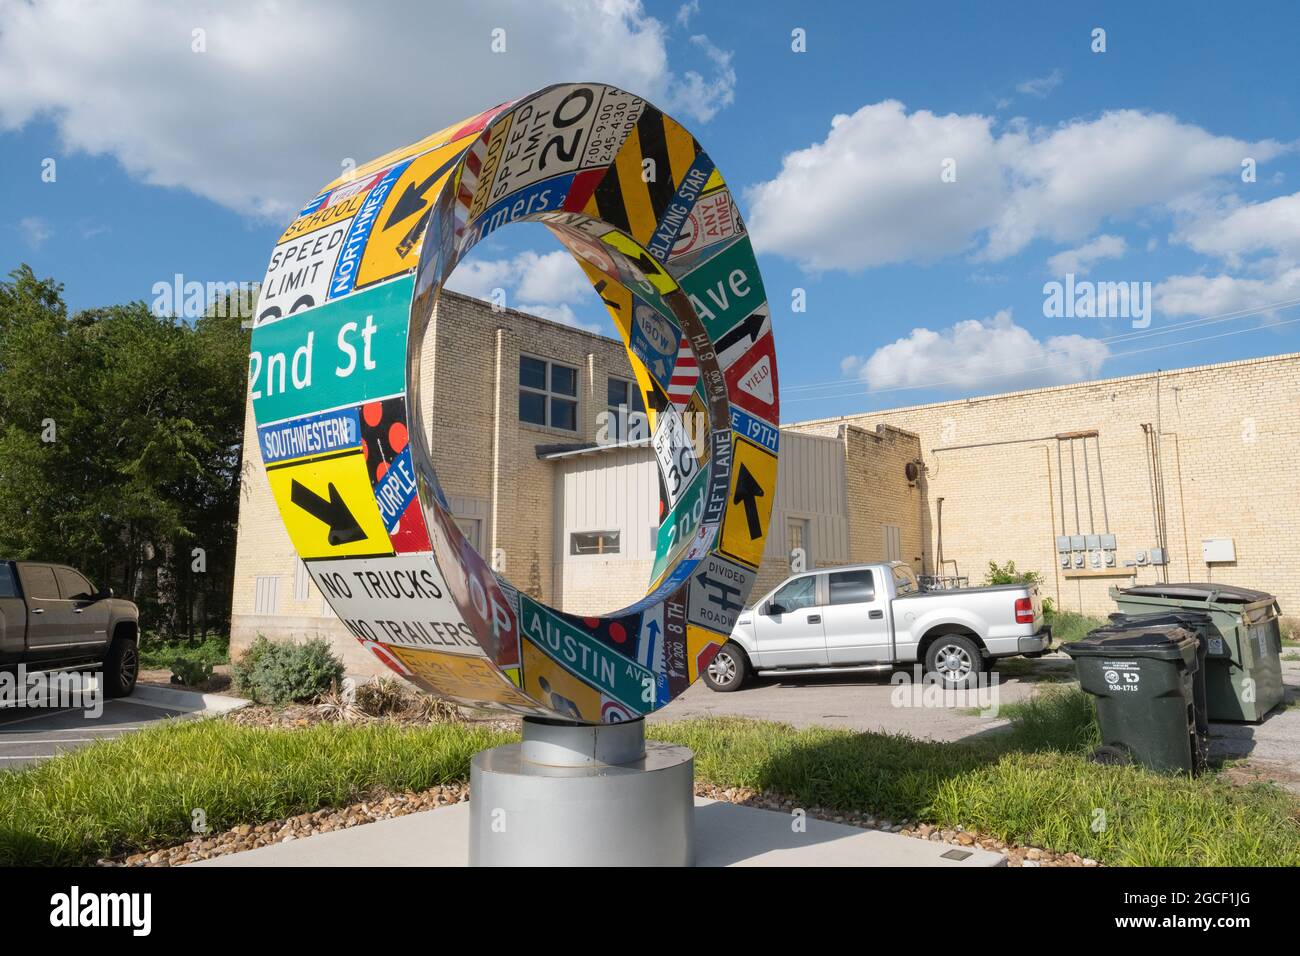 Large metal art sculpture in shape of ring that rotates with wind and decorated with road and street signs Georgetown Texas USA Stock Photo